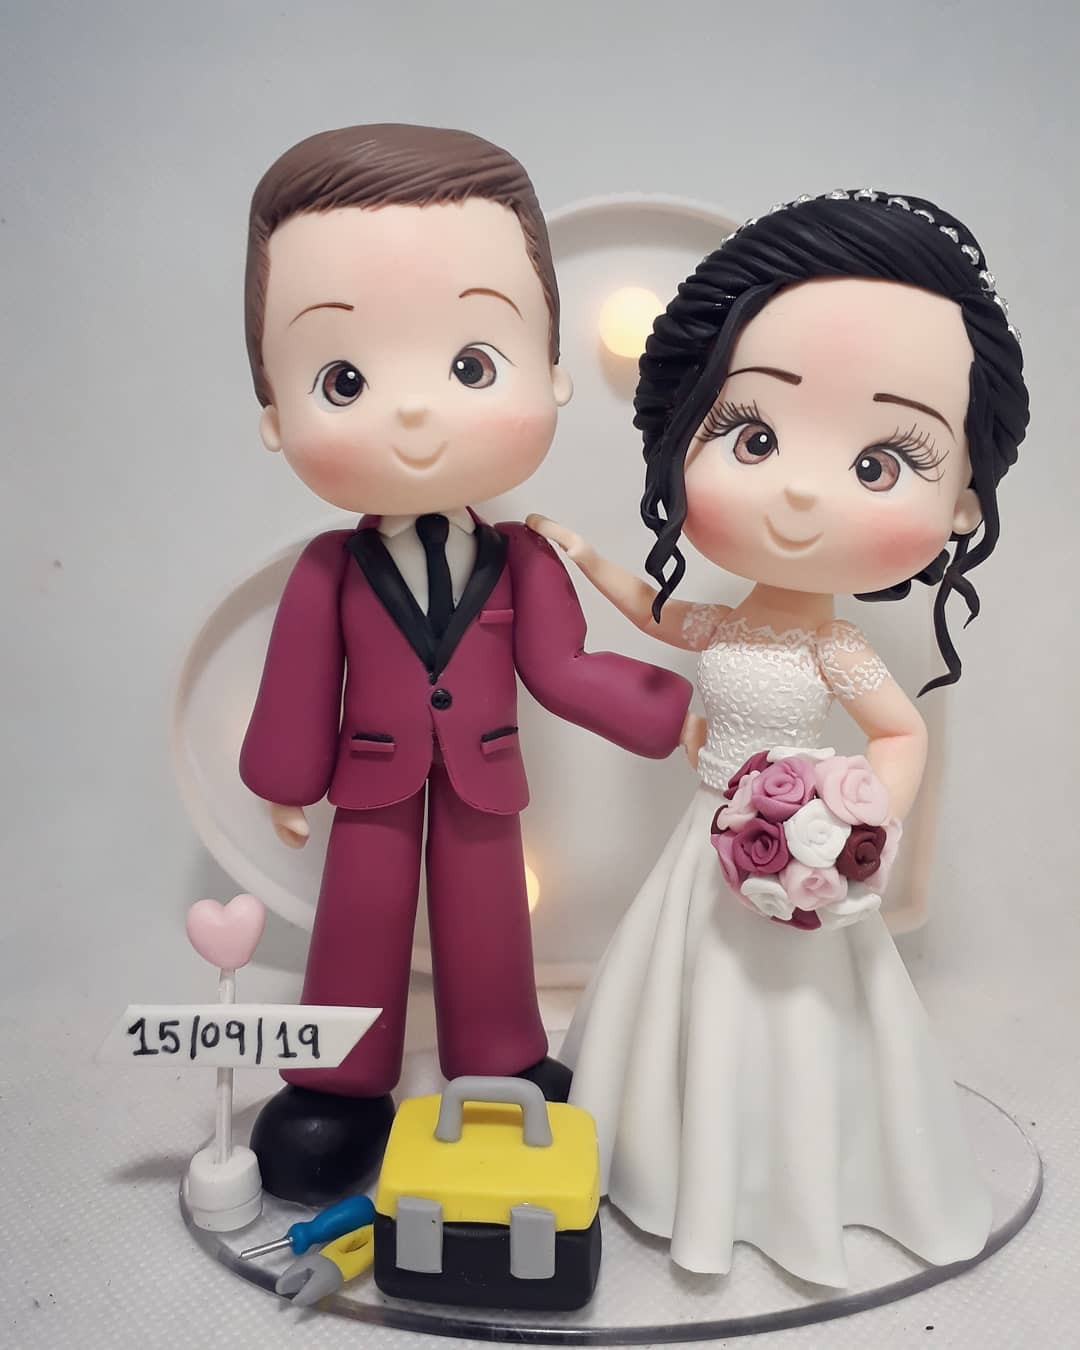 45 Best Wedding Cake Toppers You Are Sure to Love,beautiful wedding cake toppers,wedding cake toppers michaels,wedding cake toppers amazon,traditional wedding cake toppers